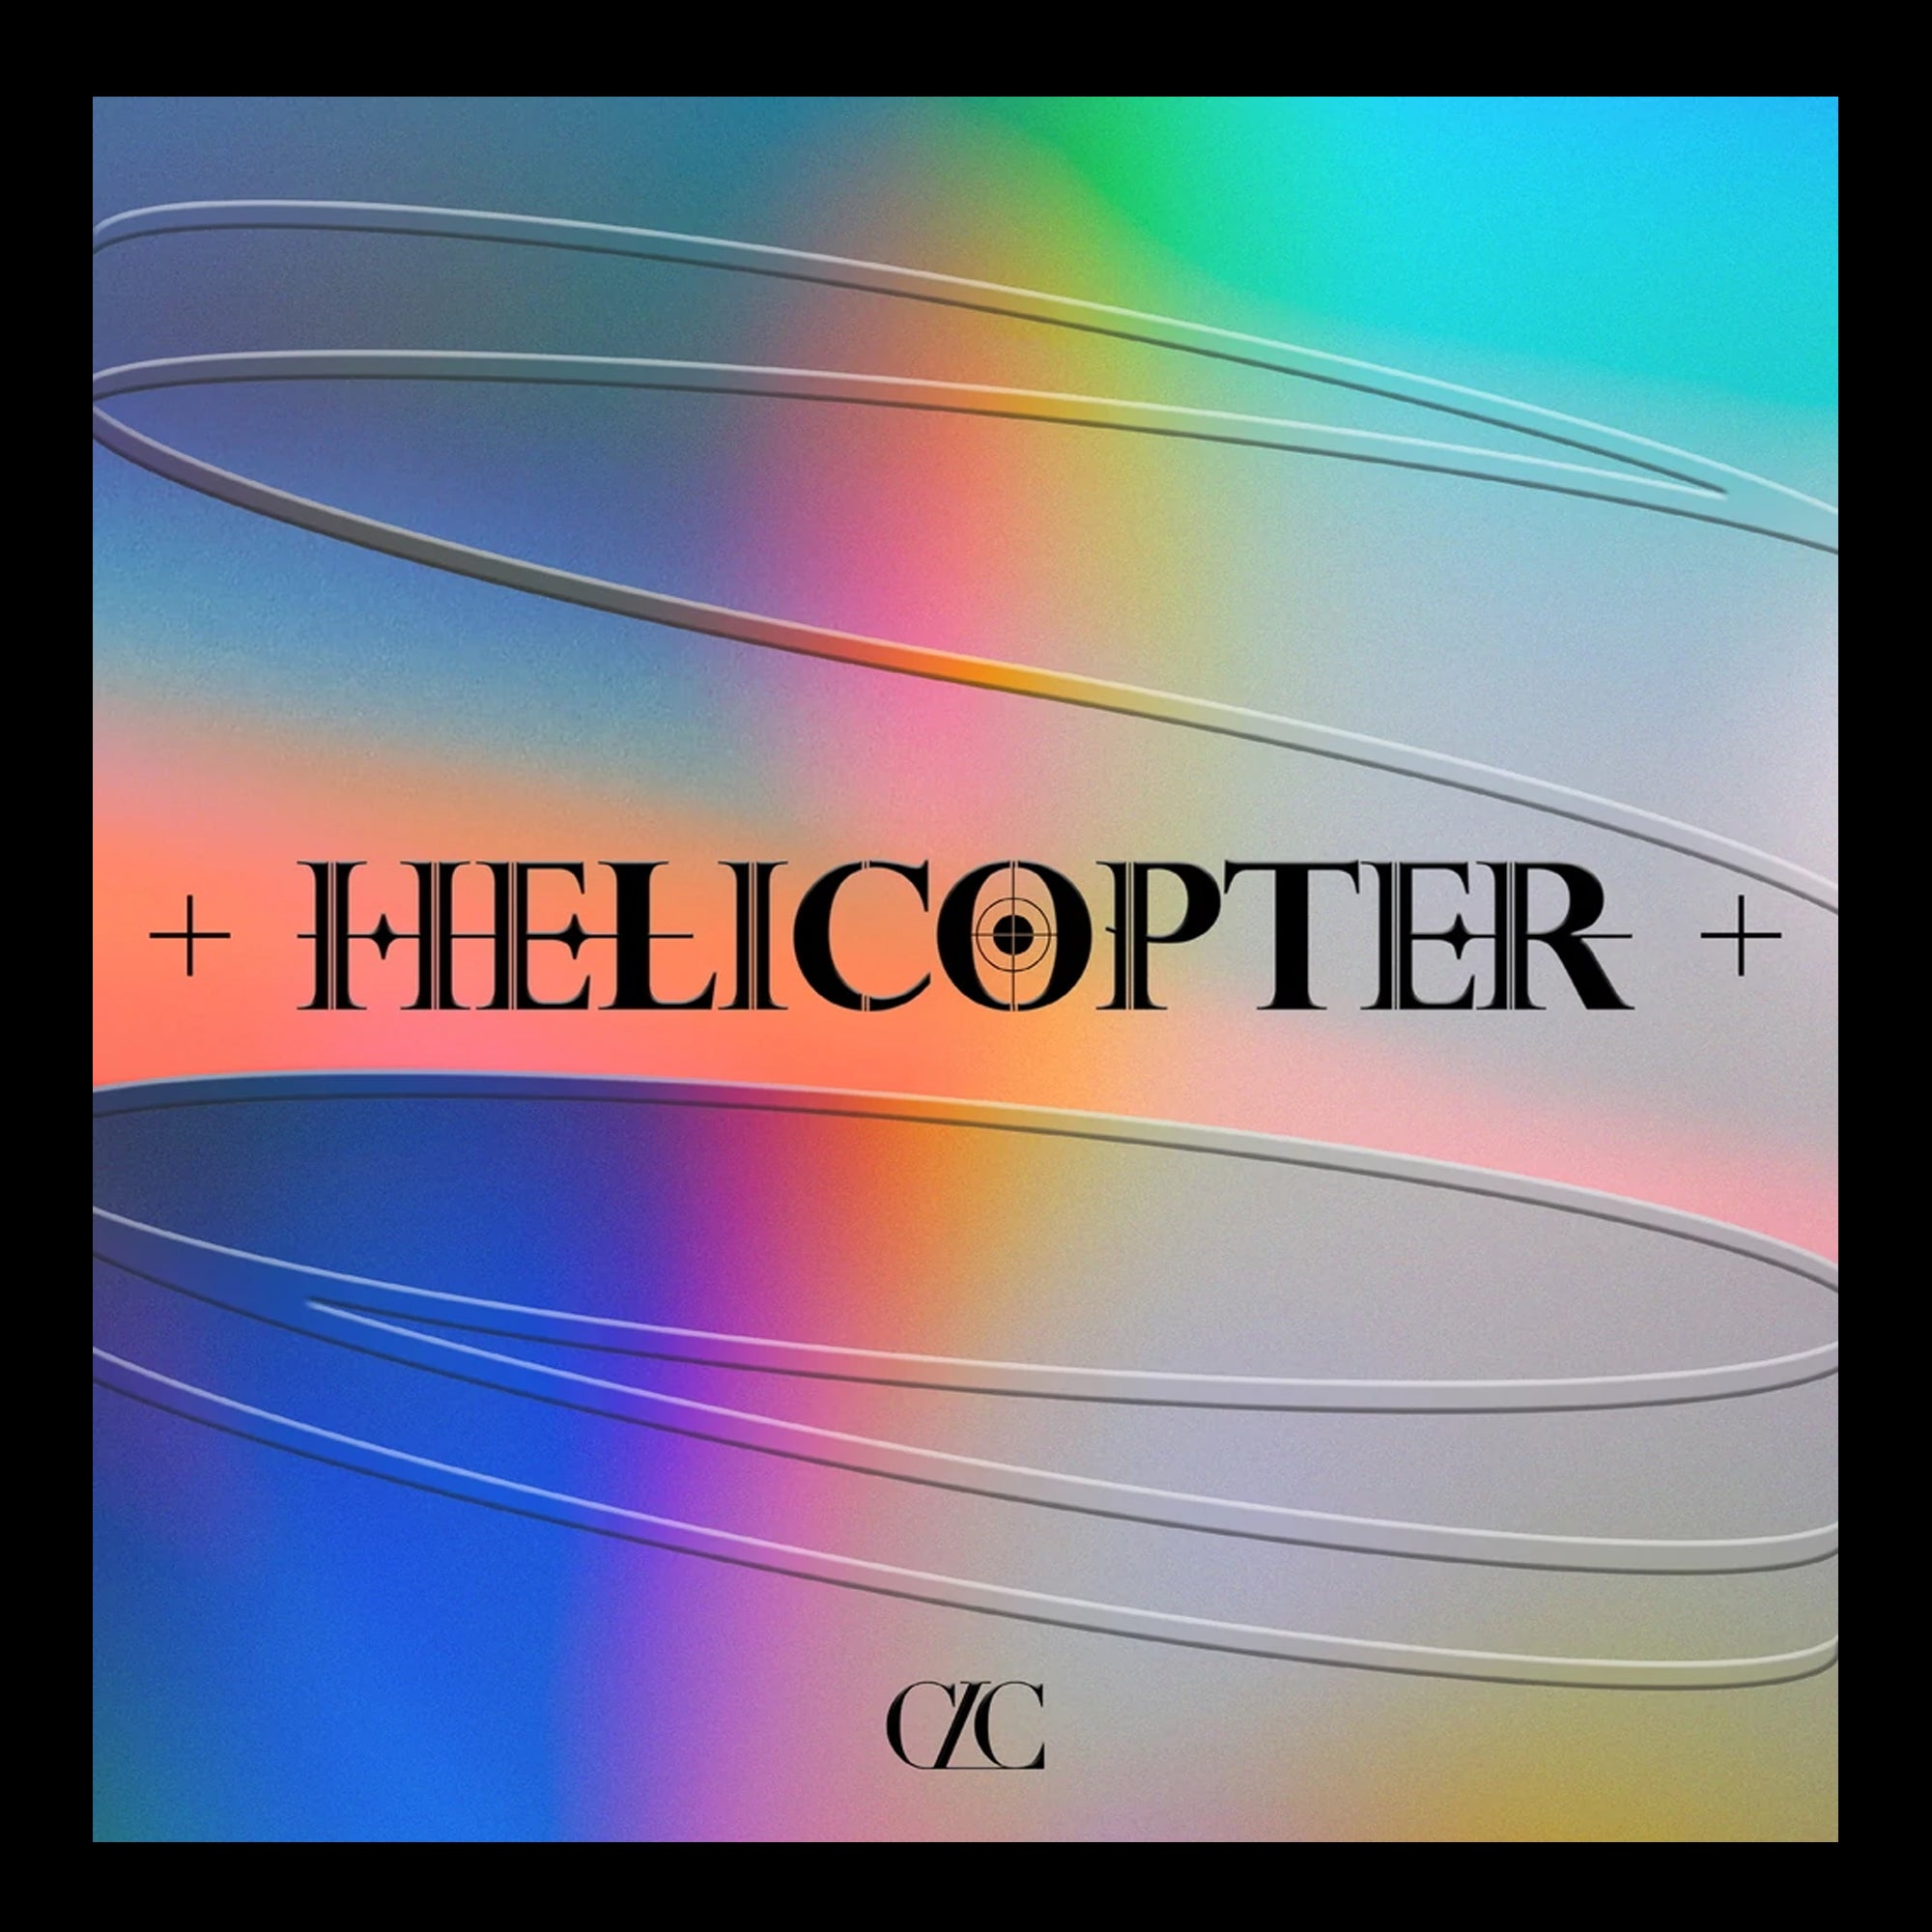 CLC - HELICOPTER